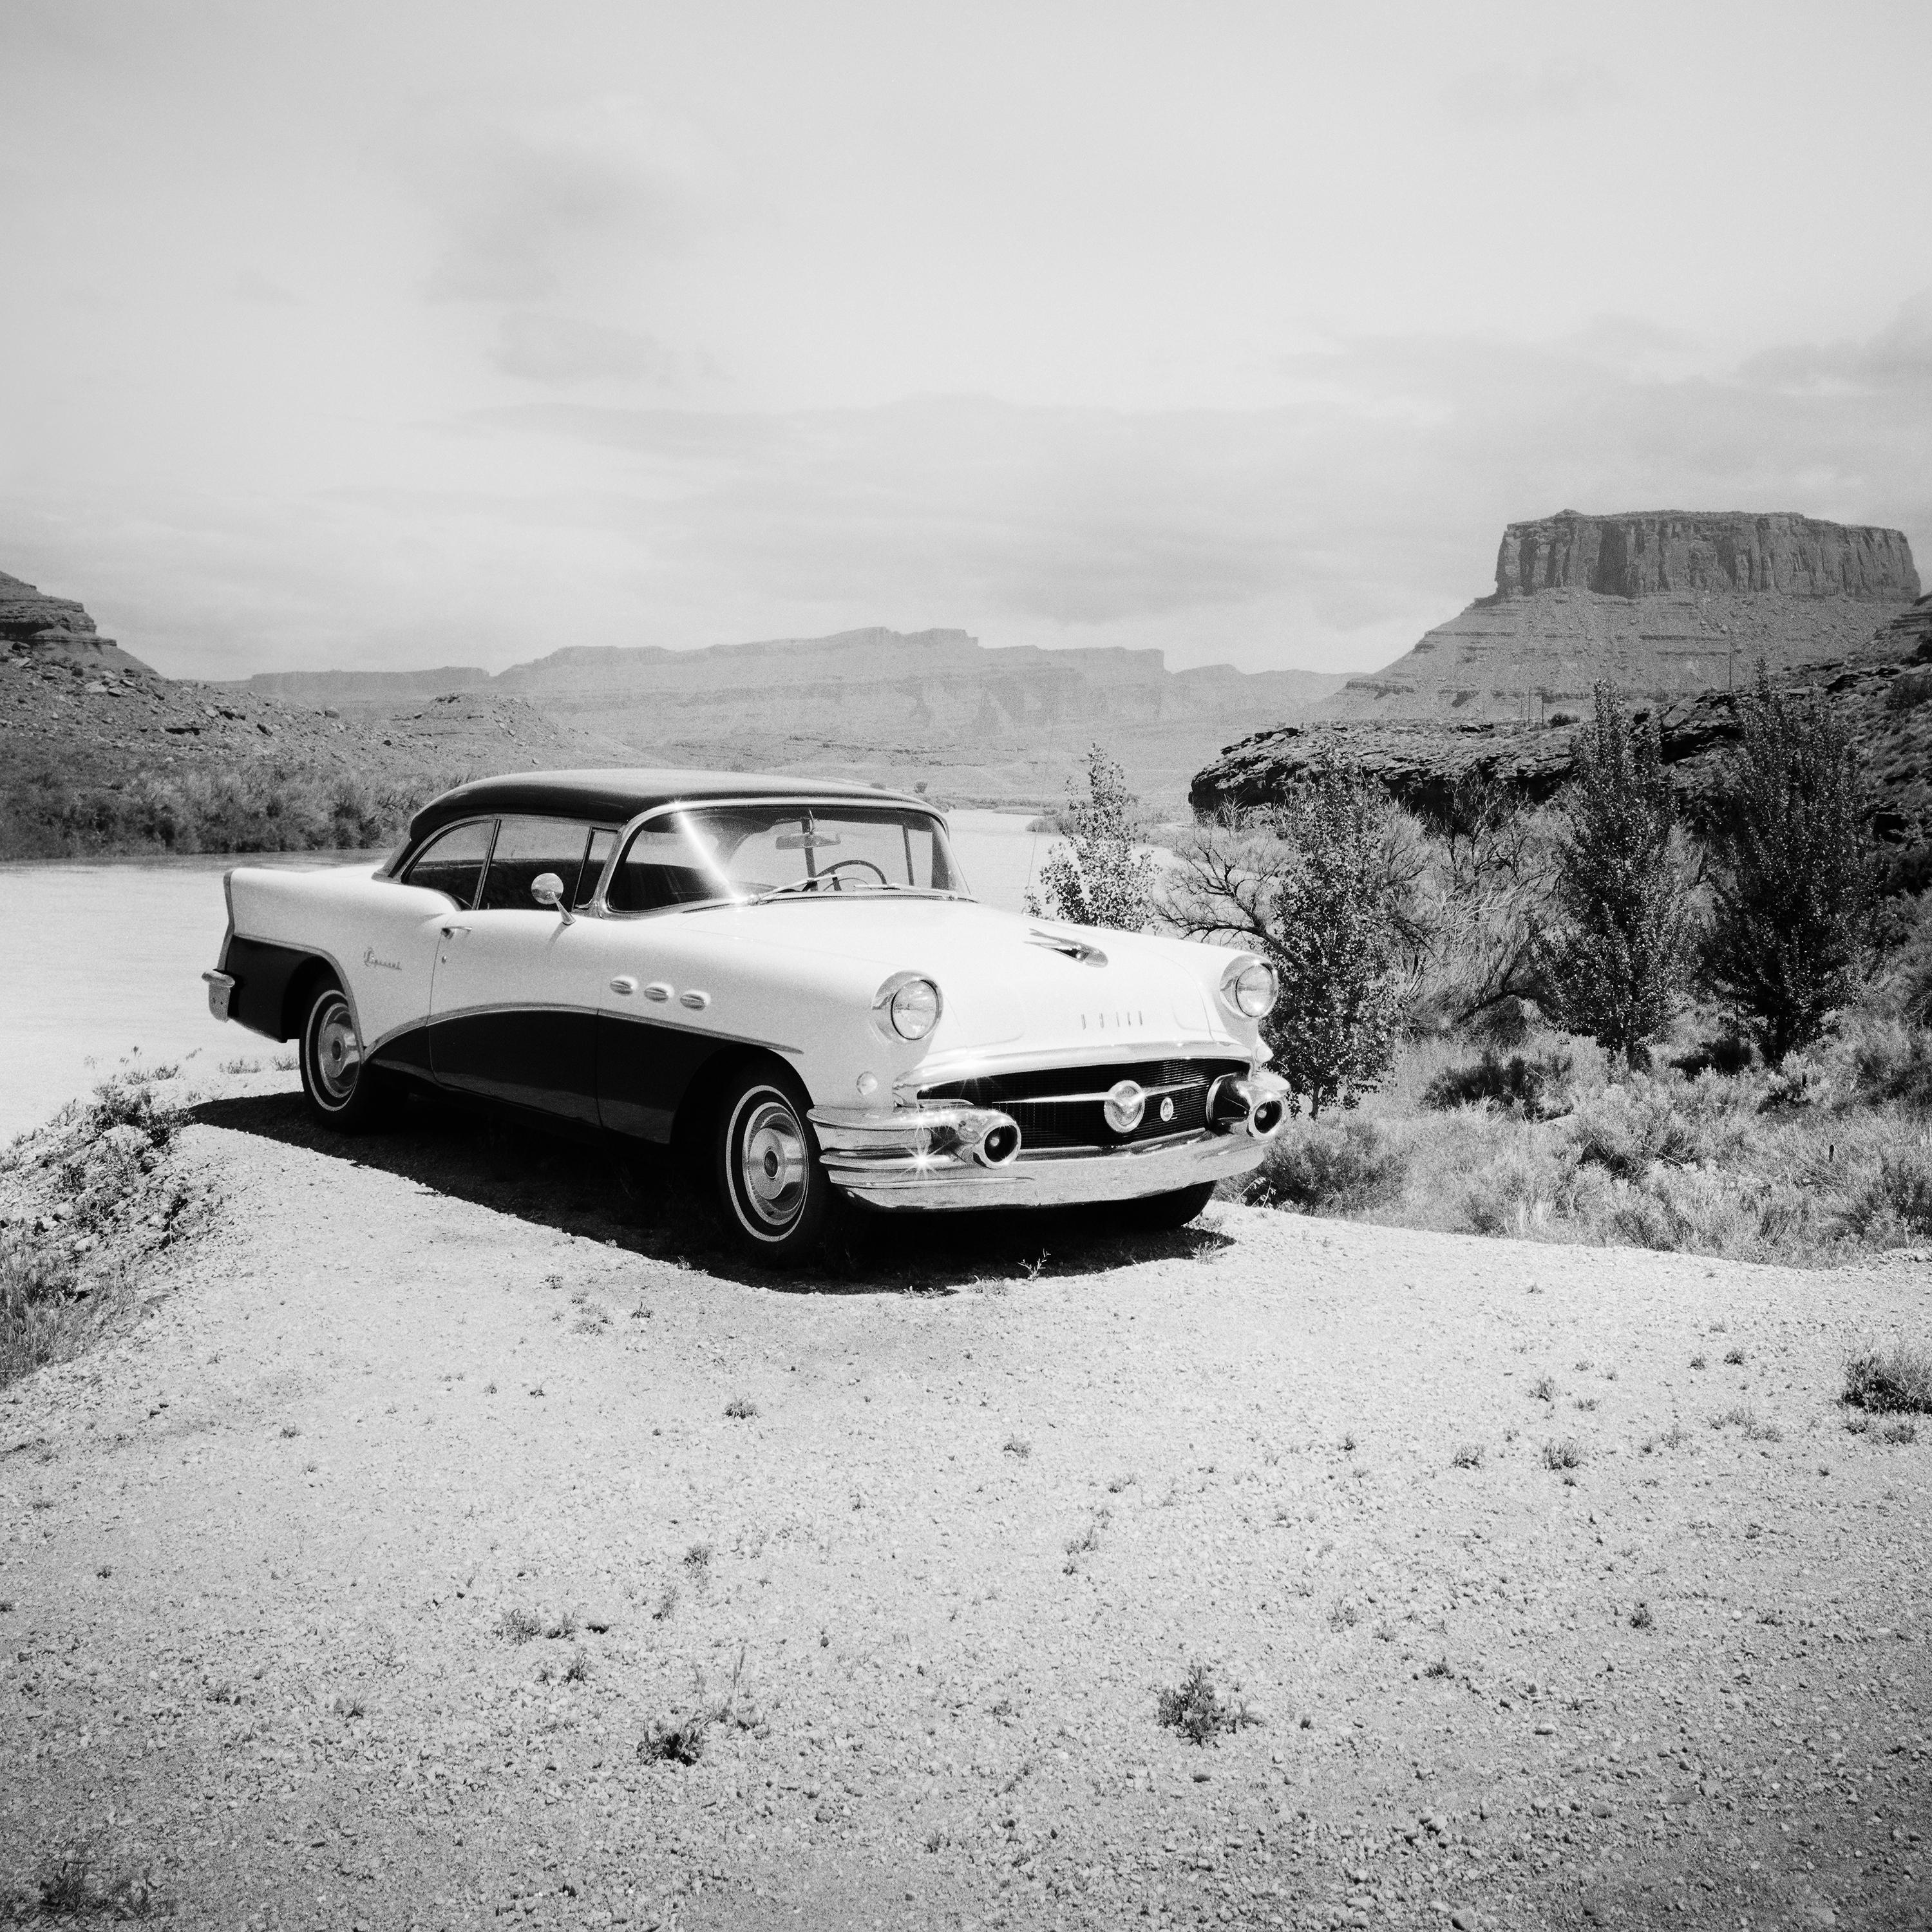 Buick 60 Century Convertible, Desert, USA, black and white landscape photography For Sale 3